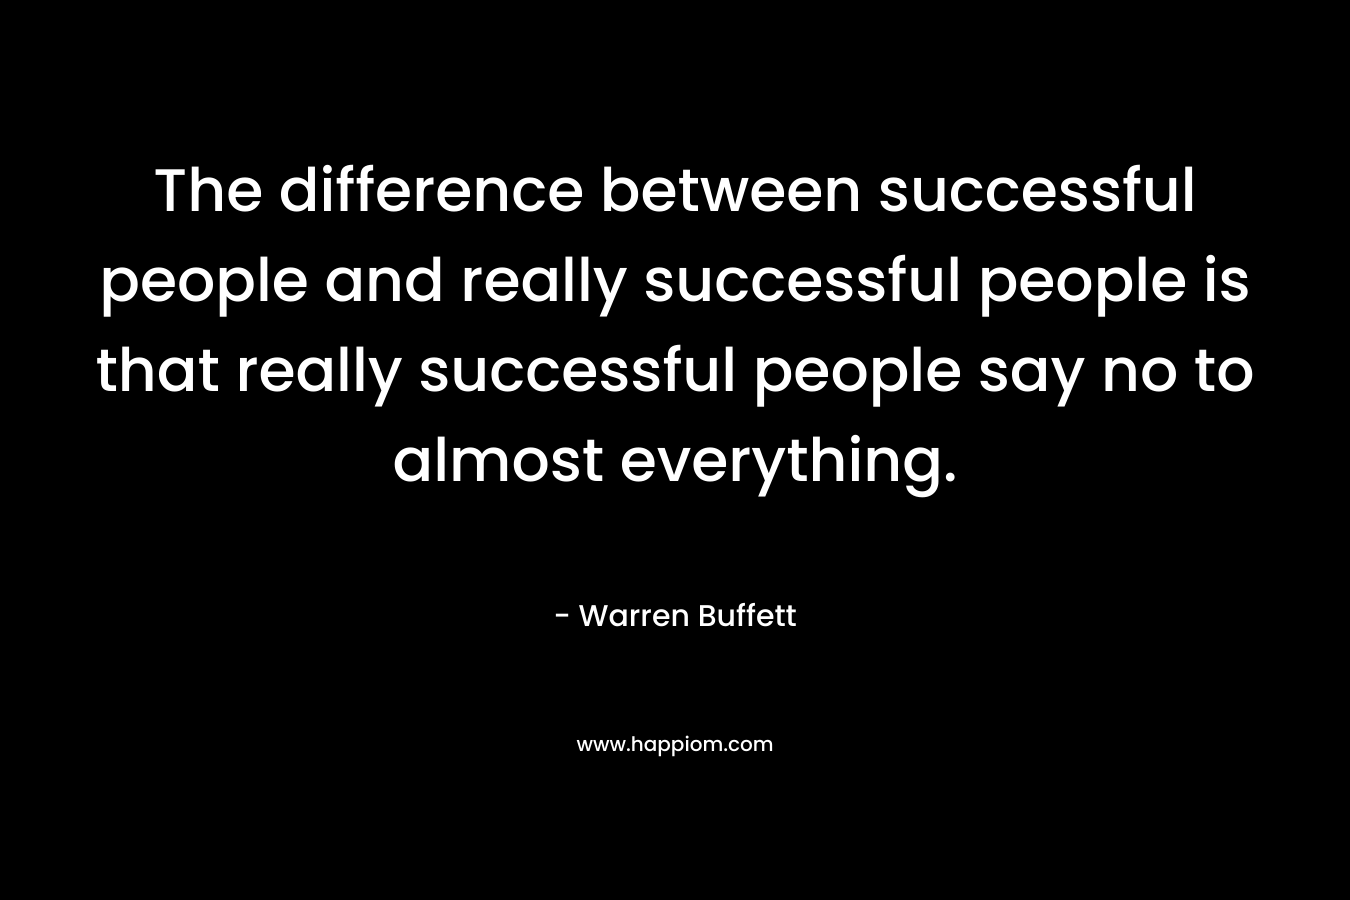 The difference between successful people and really successful people is that really successful people say no to almost everything.